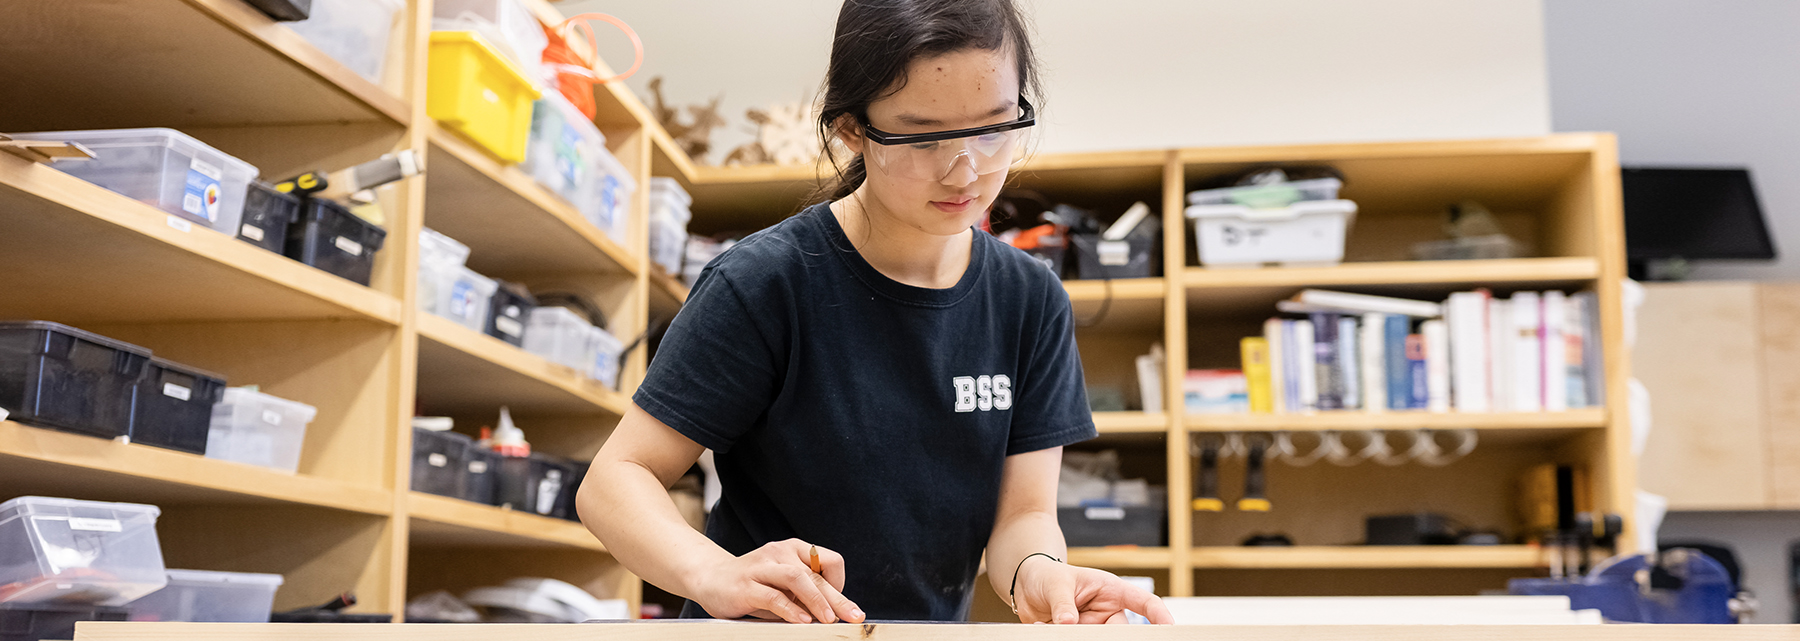 A middle school BSS student works at a drafting table.